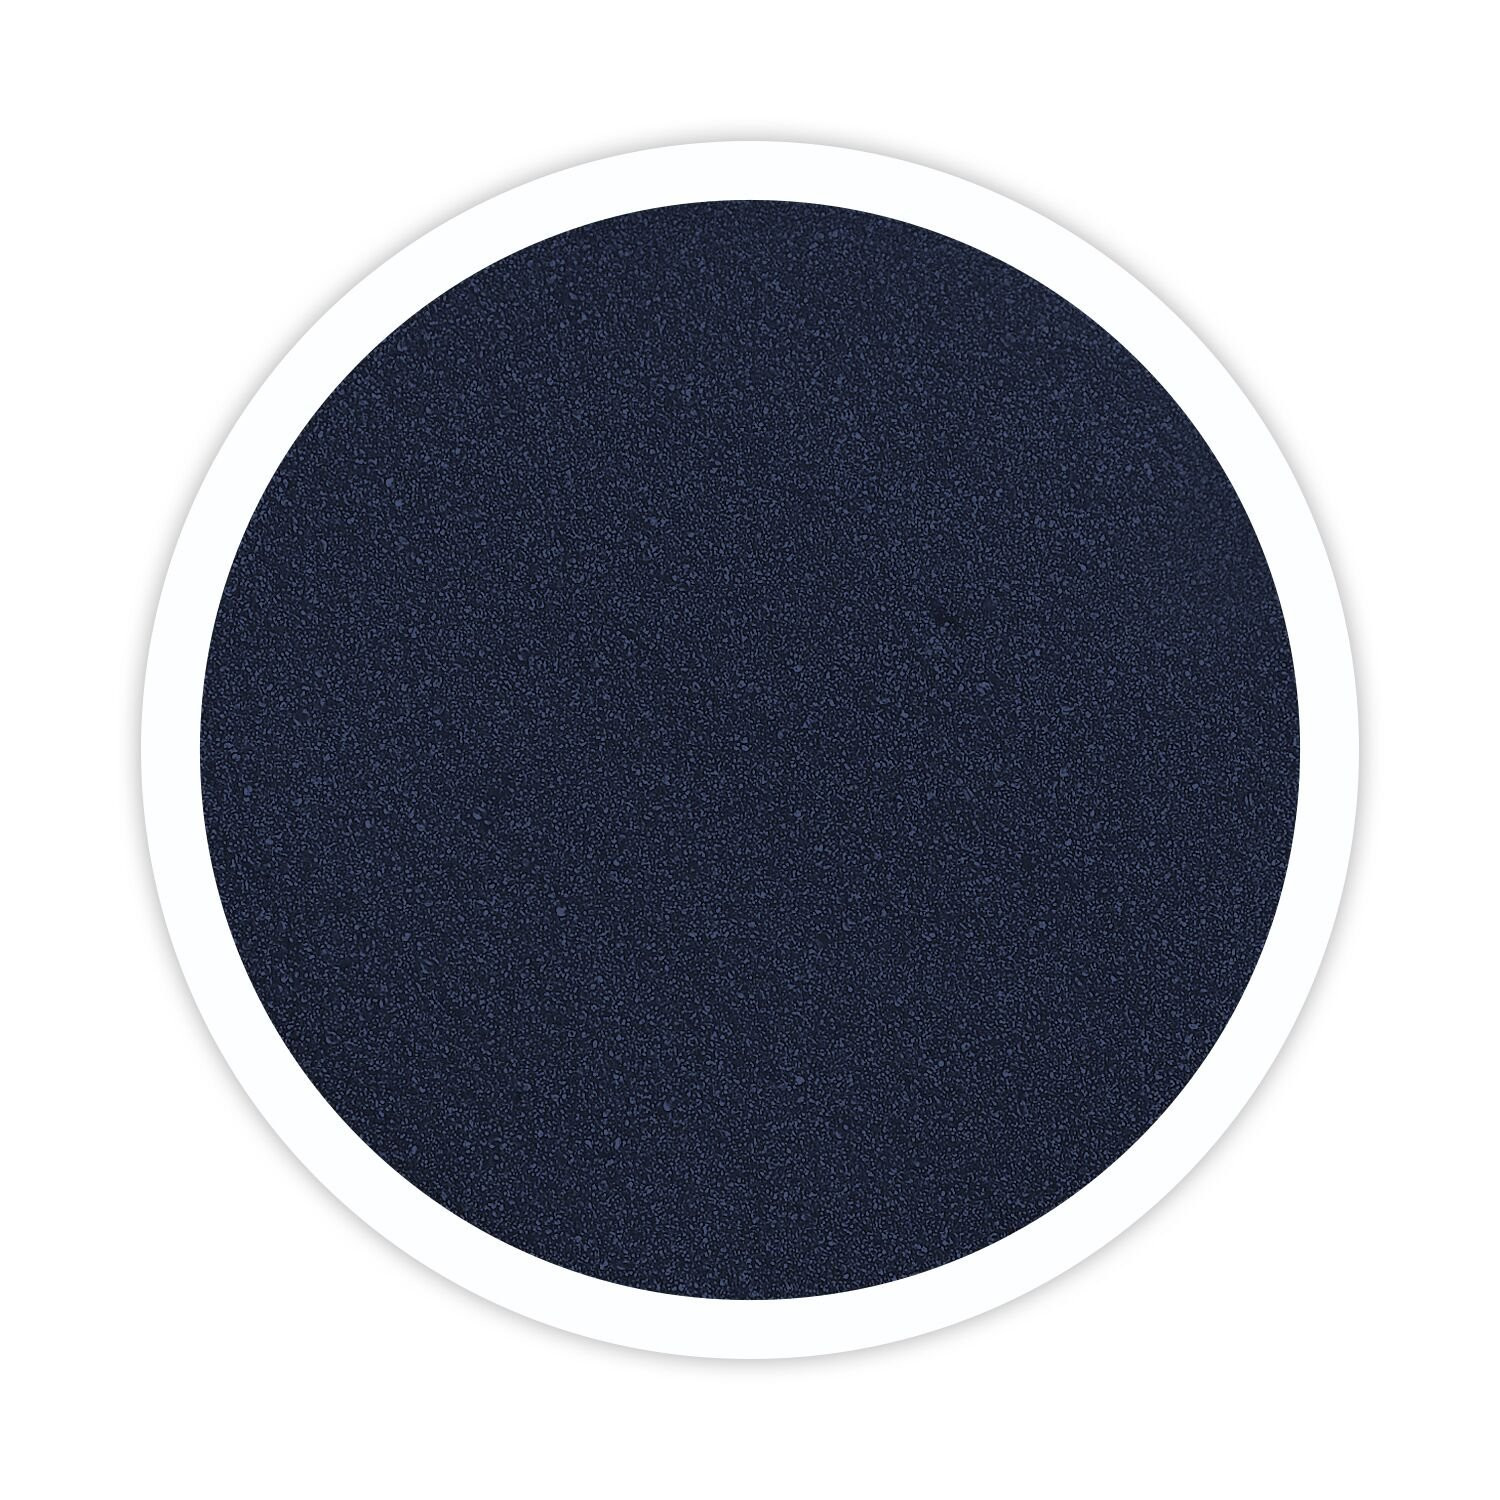 18 Perfect Unity Sand Ceremony Vase 2024 free download unity sand ceremony vase of amazon com black wedding unity sand shadow box set with in sandsational navy blue marine unity sand 1 pound colored sand for weddings